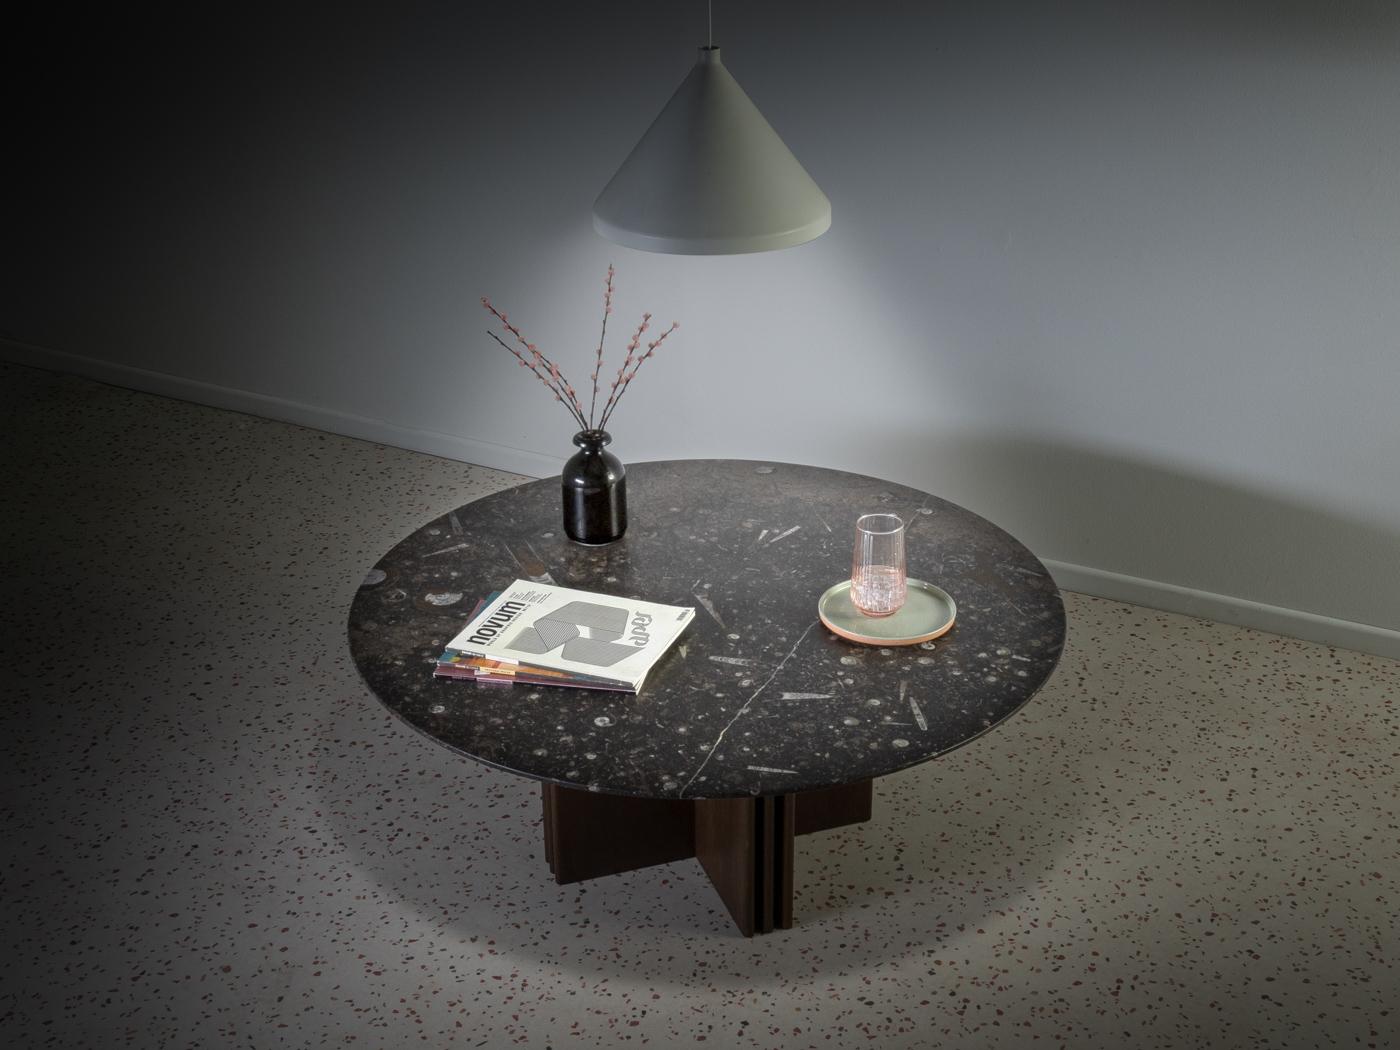 Exclusive coffee table, model 1014, by Heinz Lilienthal from the 1980s. High-quality frame made of oak in the shade wenge with a table top made of fossil rock (high Devonian, about 340 - 480 million years old) in gray, brown and cream tones.